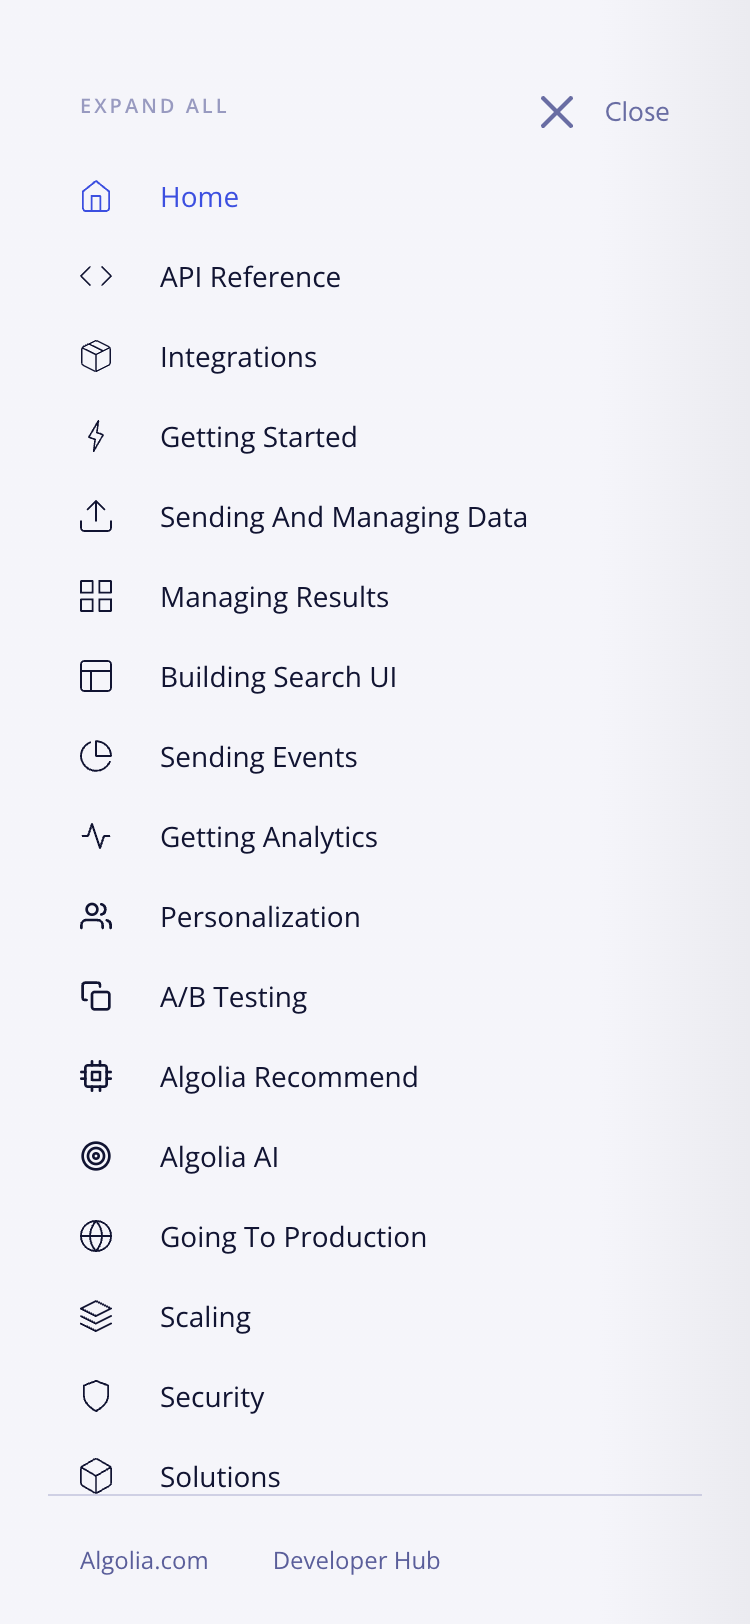 A mobile screenshot of the Algolia documentation navigation. The navigation covers the whole screen and lists the various guides. A 'close' button can be seen in the upper right corner of the screen.